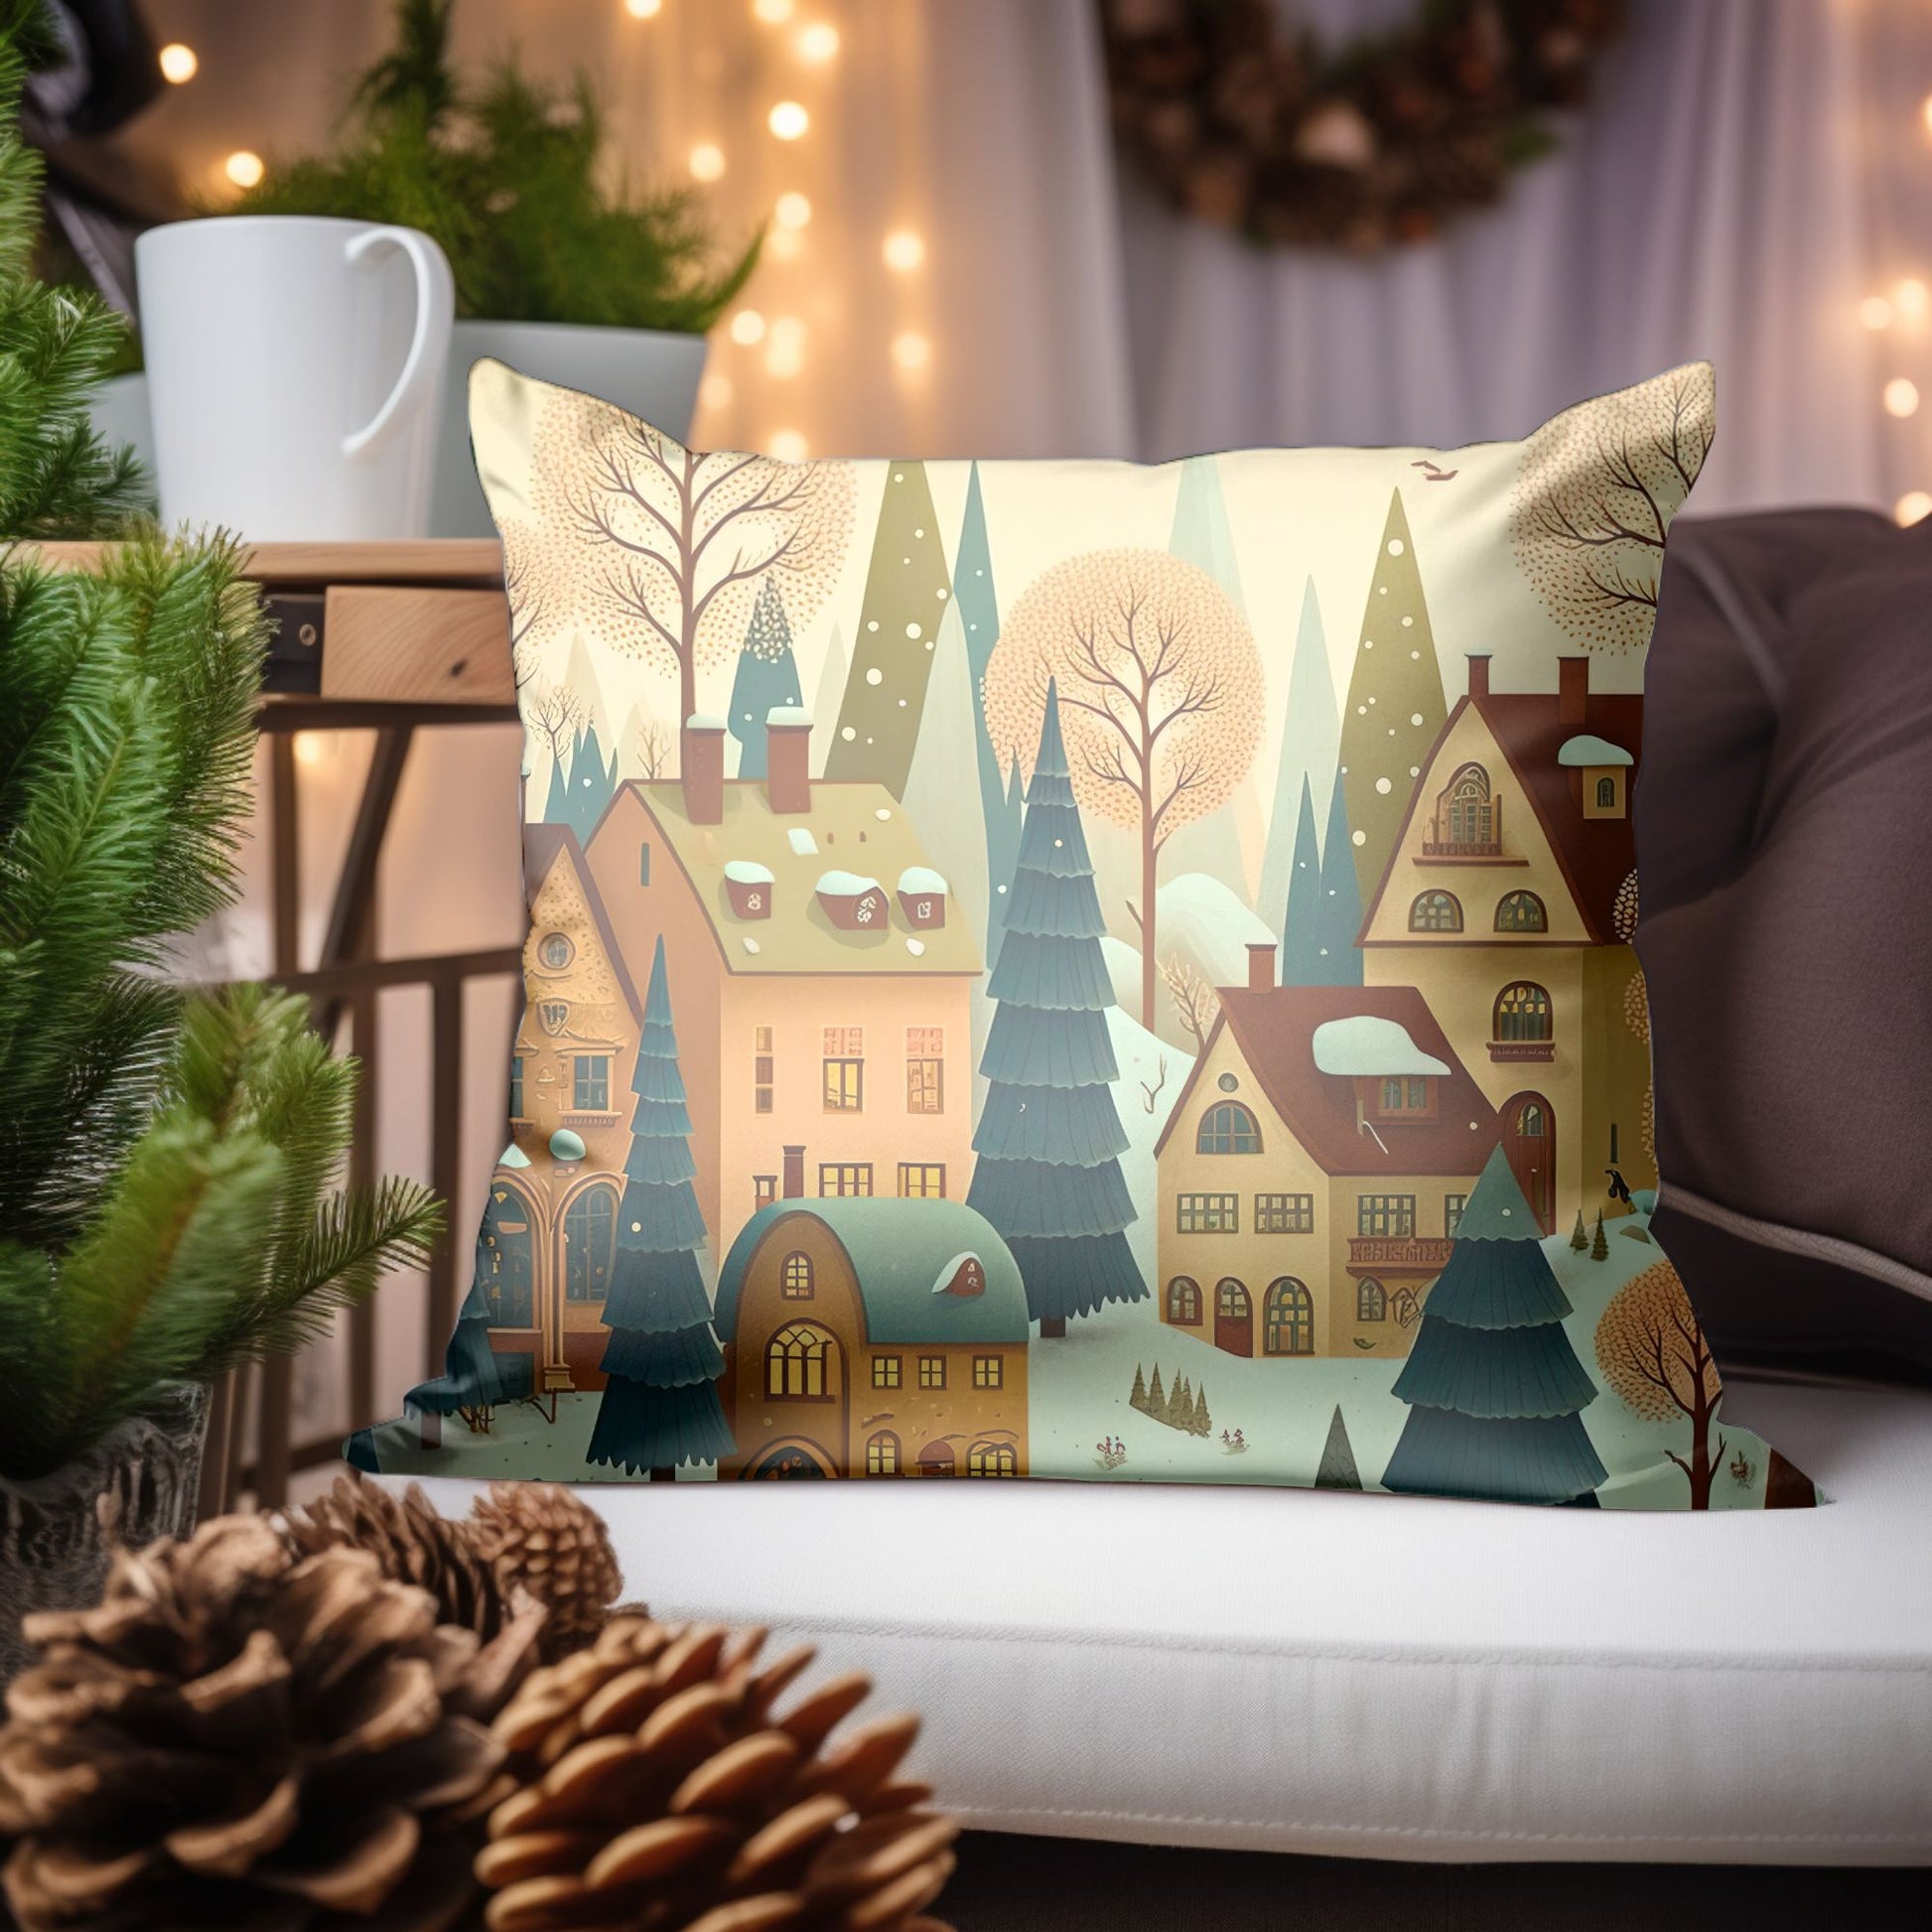 Detail of the Christmas Village Design on the Festive Pillow